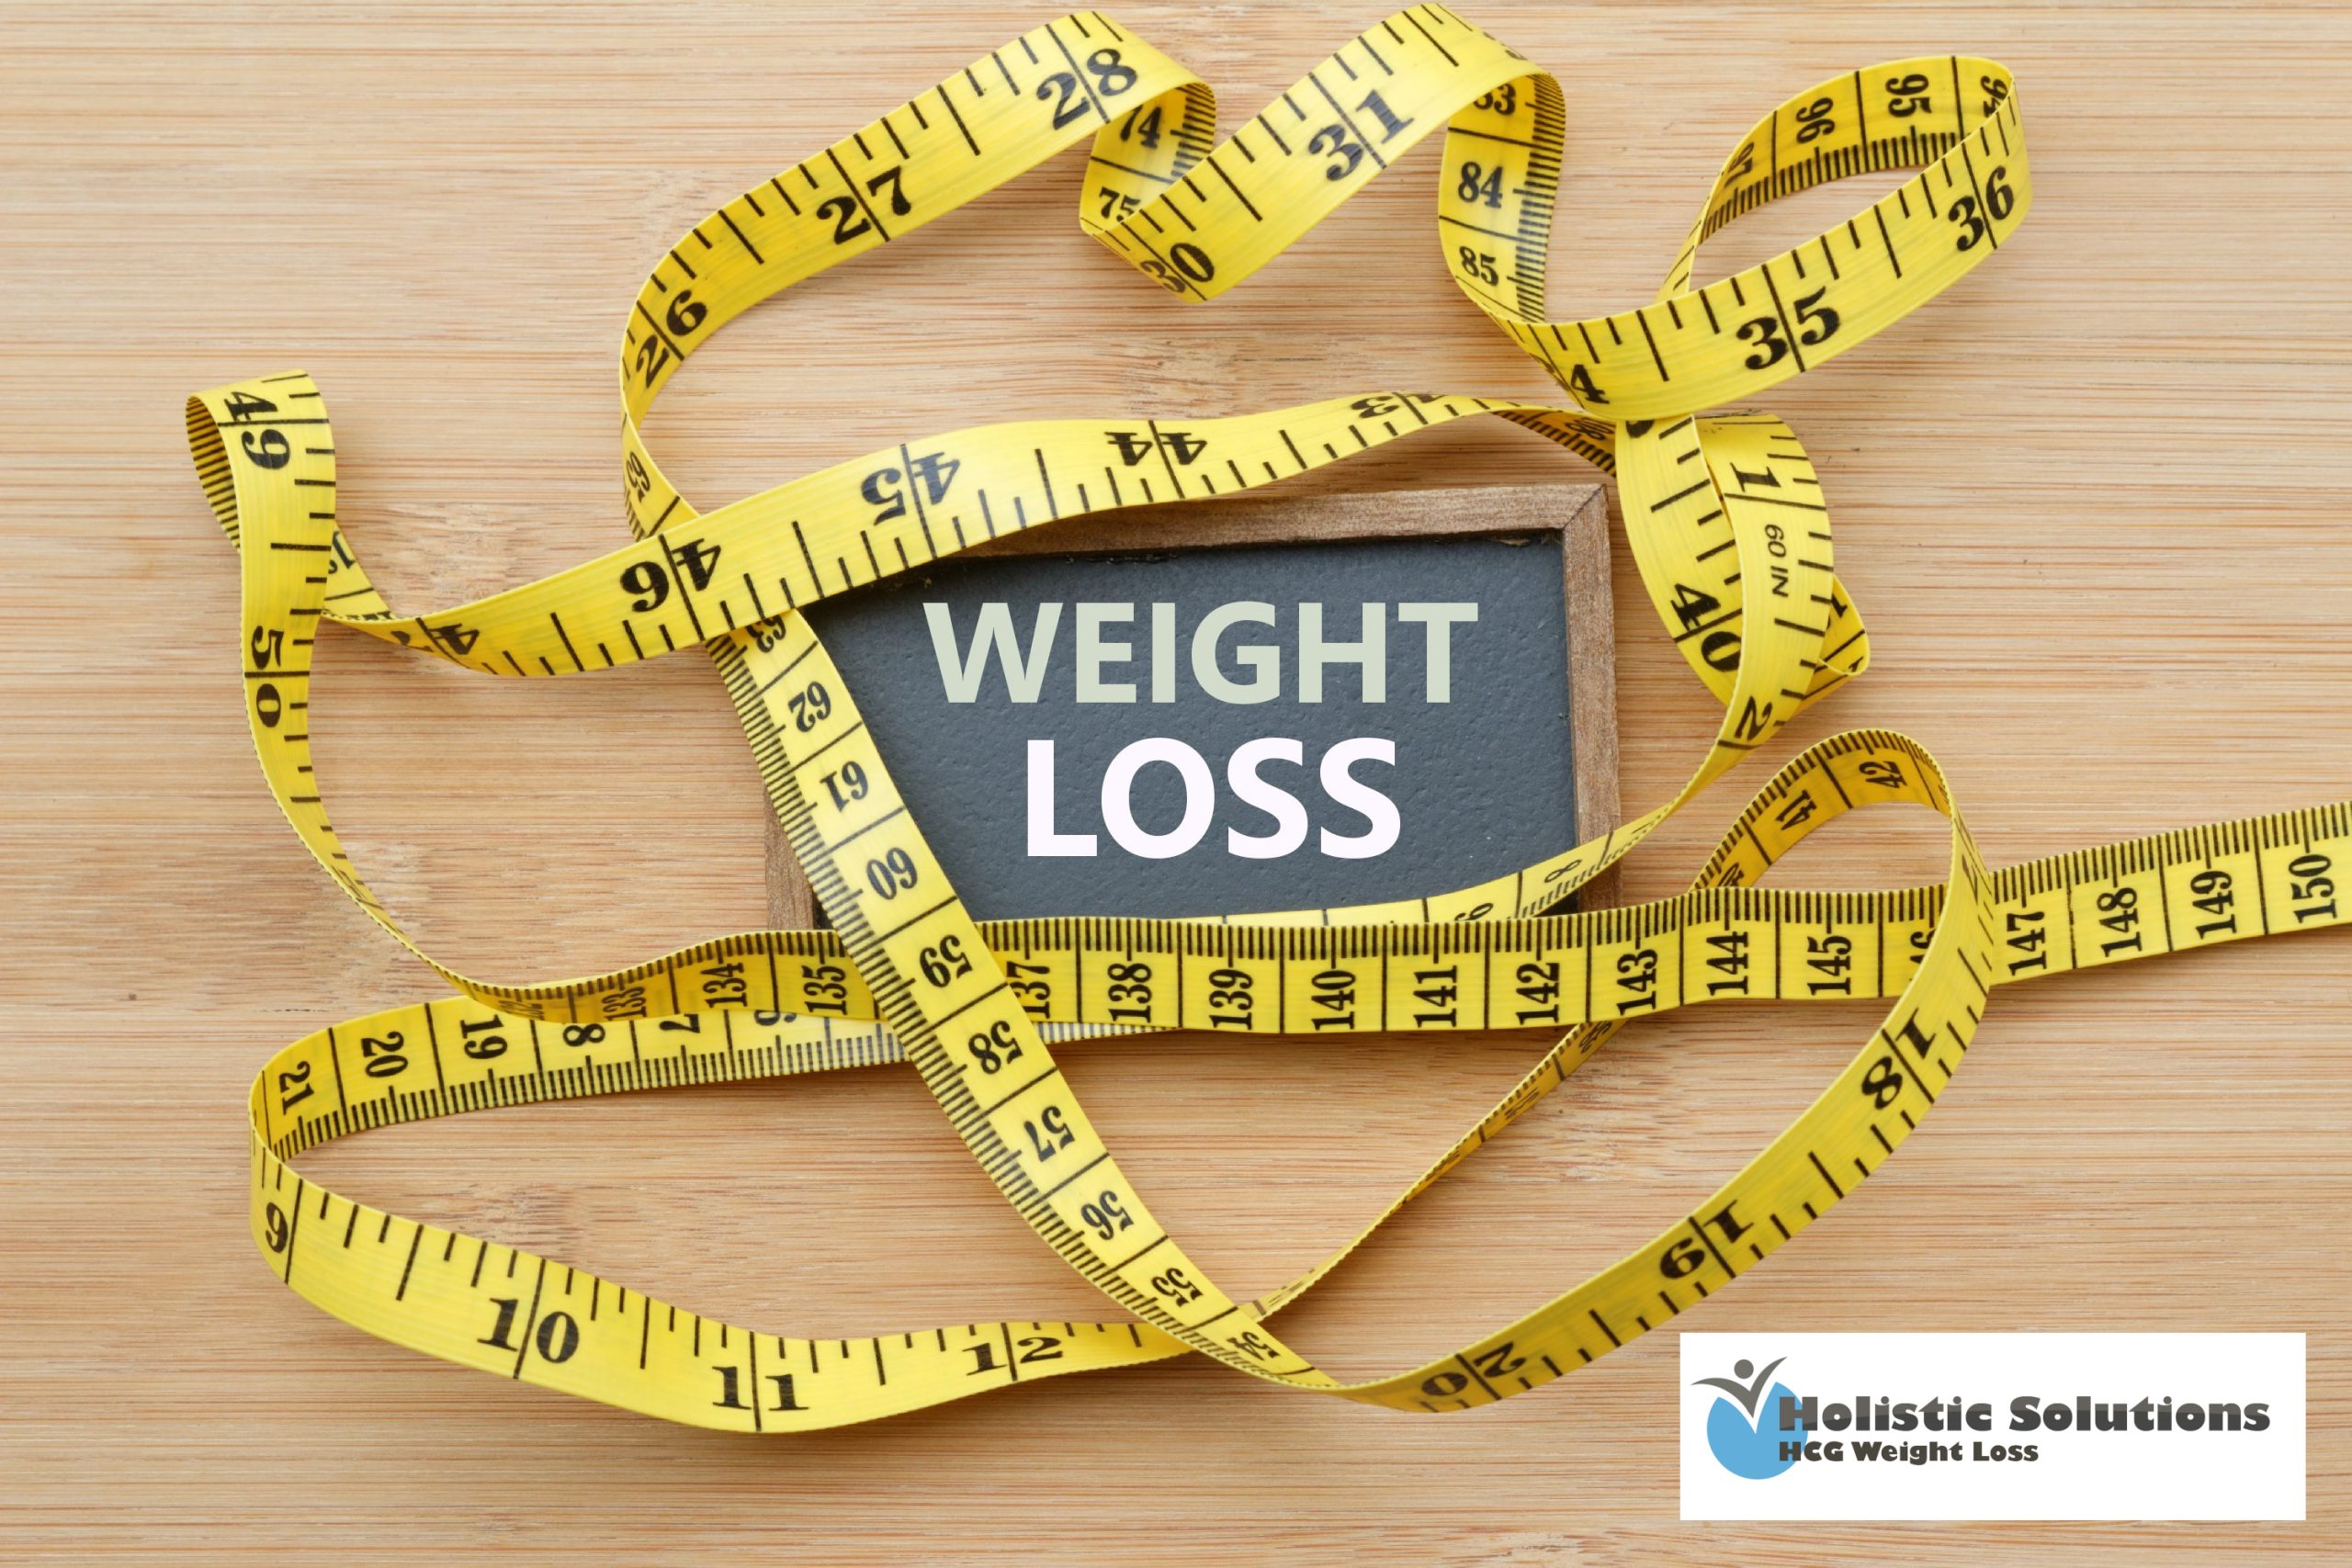 Have You Tried HCG Injections To Lose Weight?